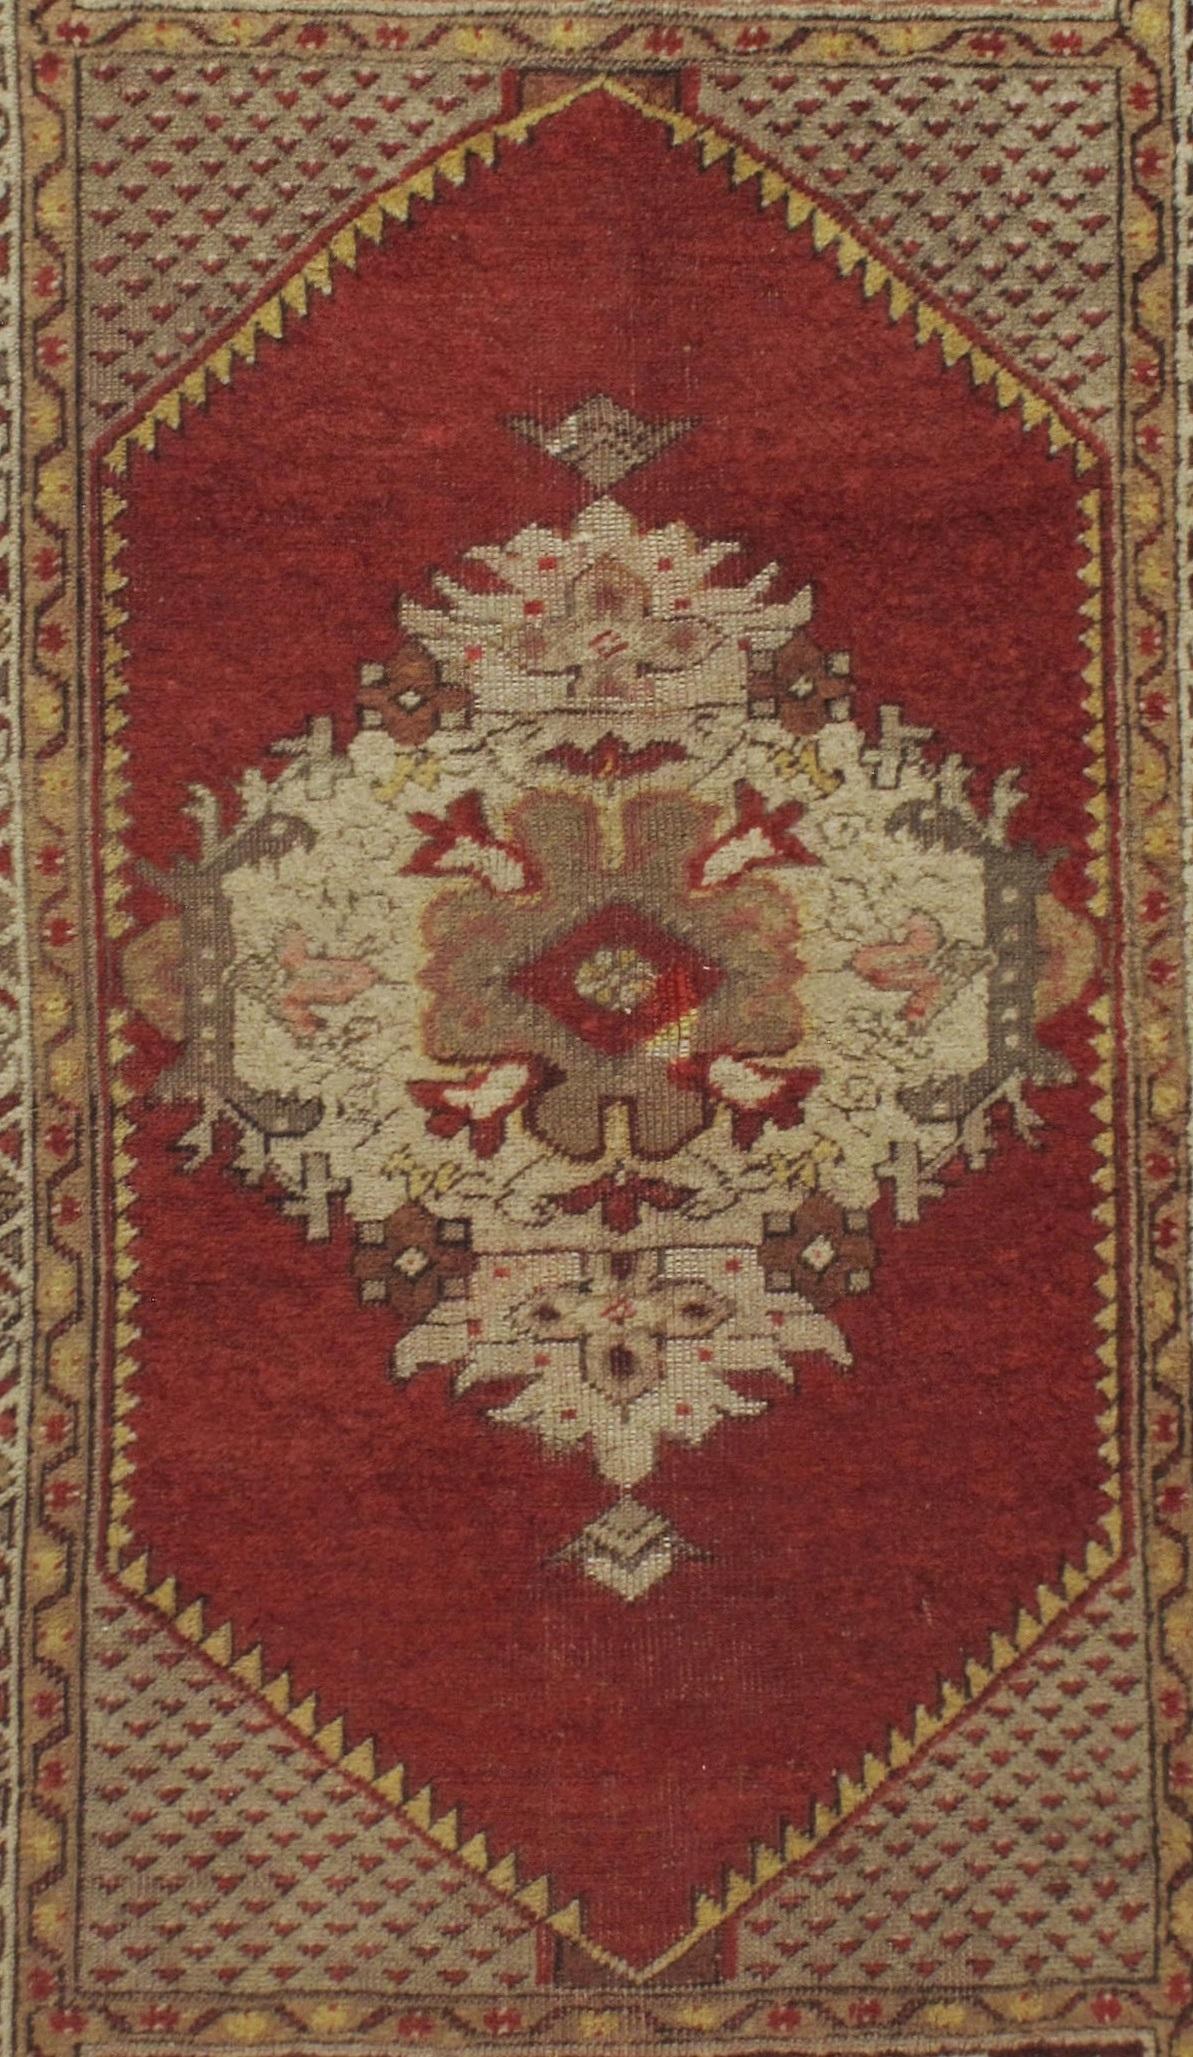 Vintage brick red turkish oushak area rug, 3' X 5'8. Character, tradition, pattern and palette converge in this gorgeous handwoven vintage Turkish Oushak rug with soft colors. Colors: brick/taupe/ivory/grey.